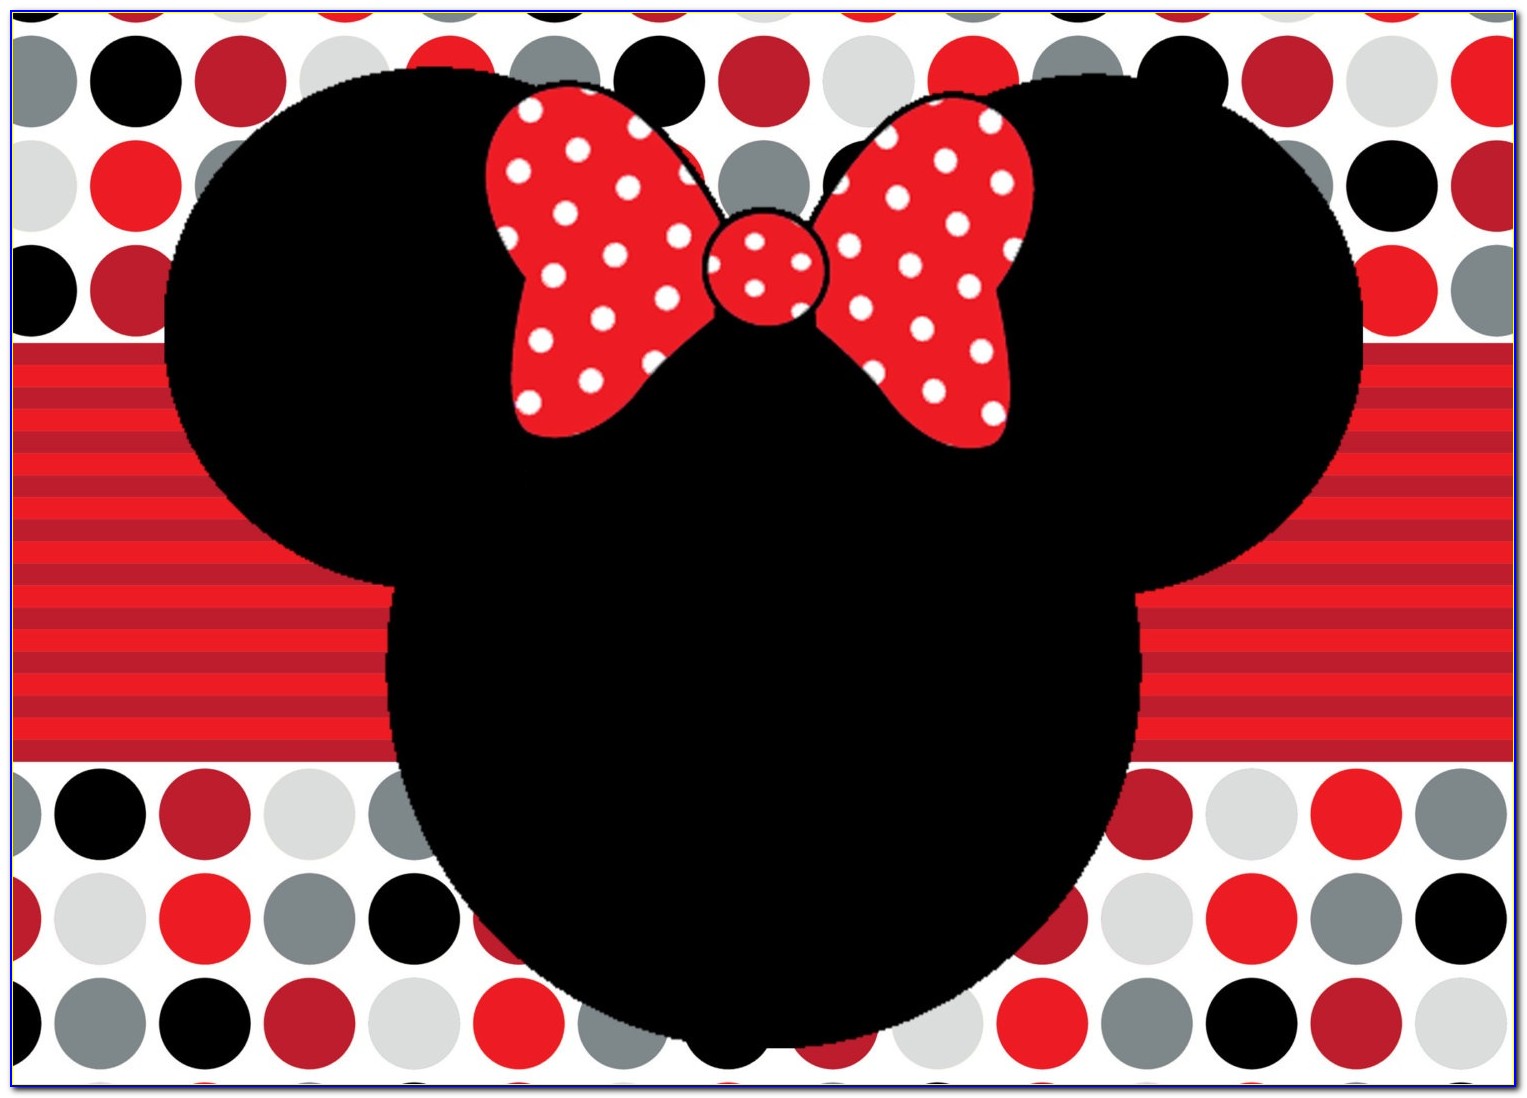 Mickey Mouse Birthday Cards For Adults